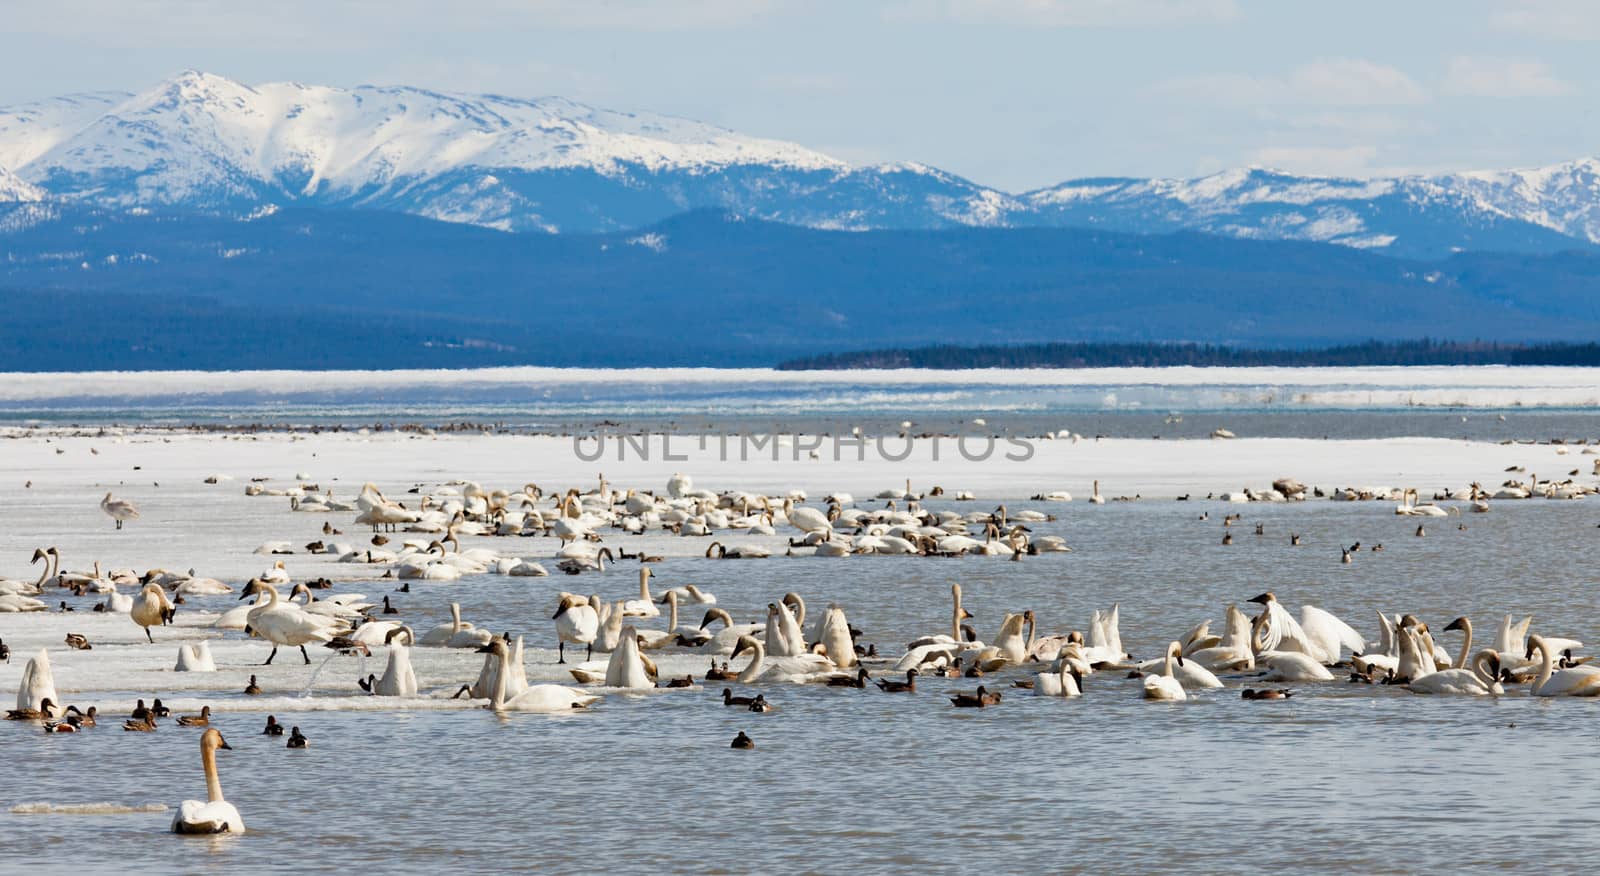 Migratory waterfowl such as swans, geese, ducks gather at Swan Haven, Marsh Lake, Yukon Territory, Canada